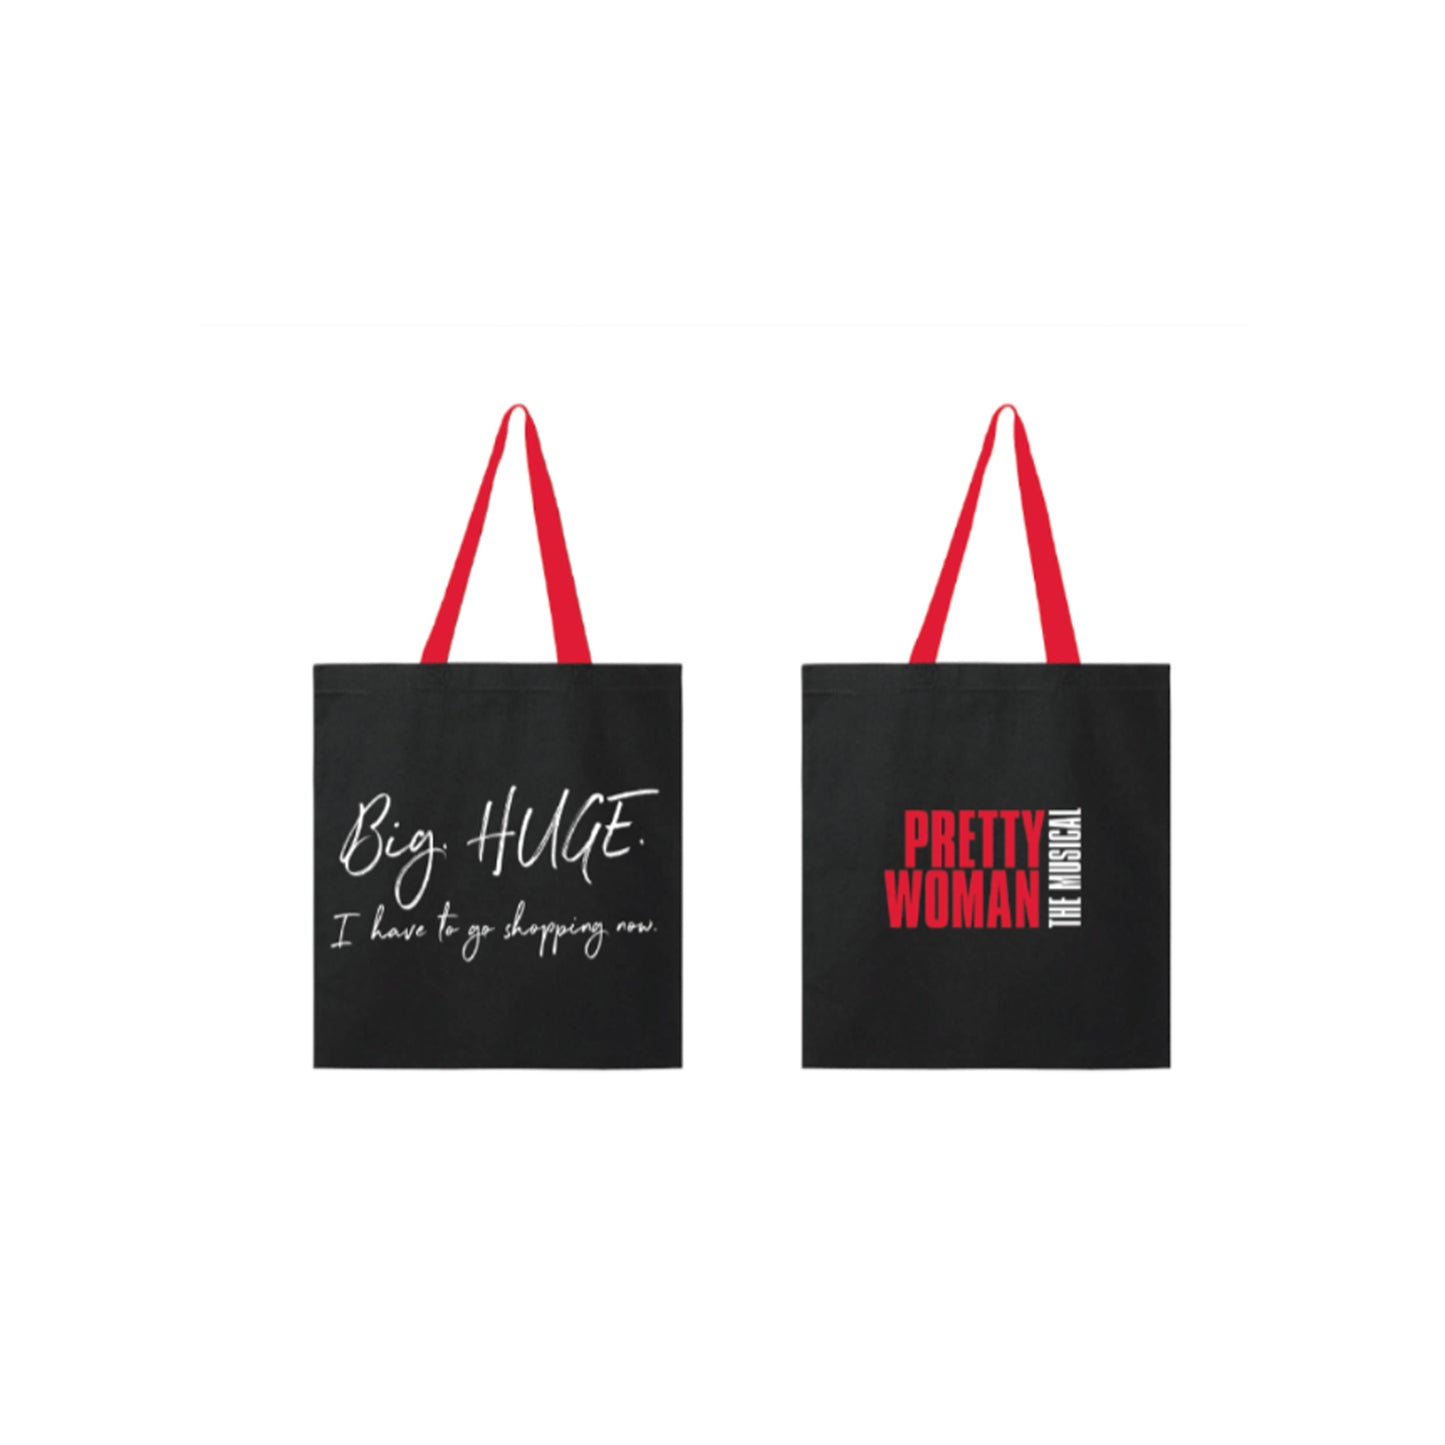 PRETTY WOMAN - Big HUGE. I Have to Go Shopping Now Tote Bag